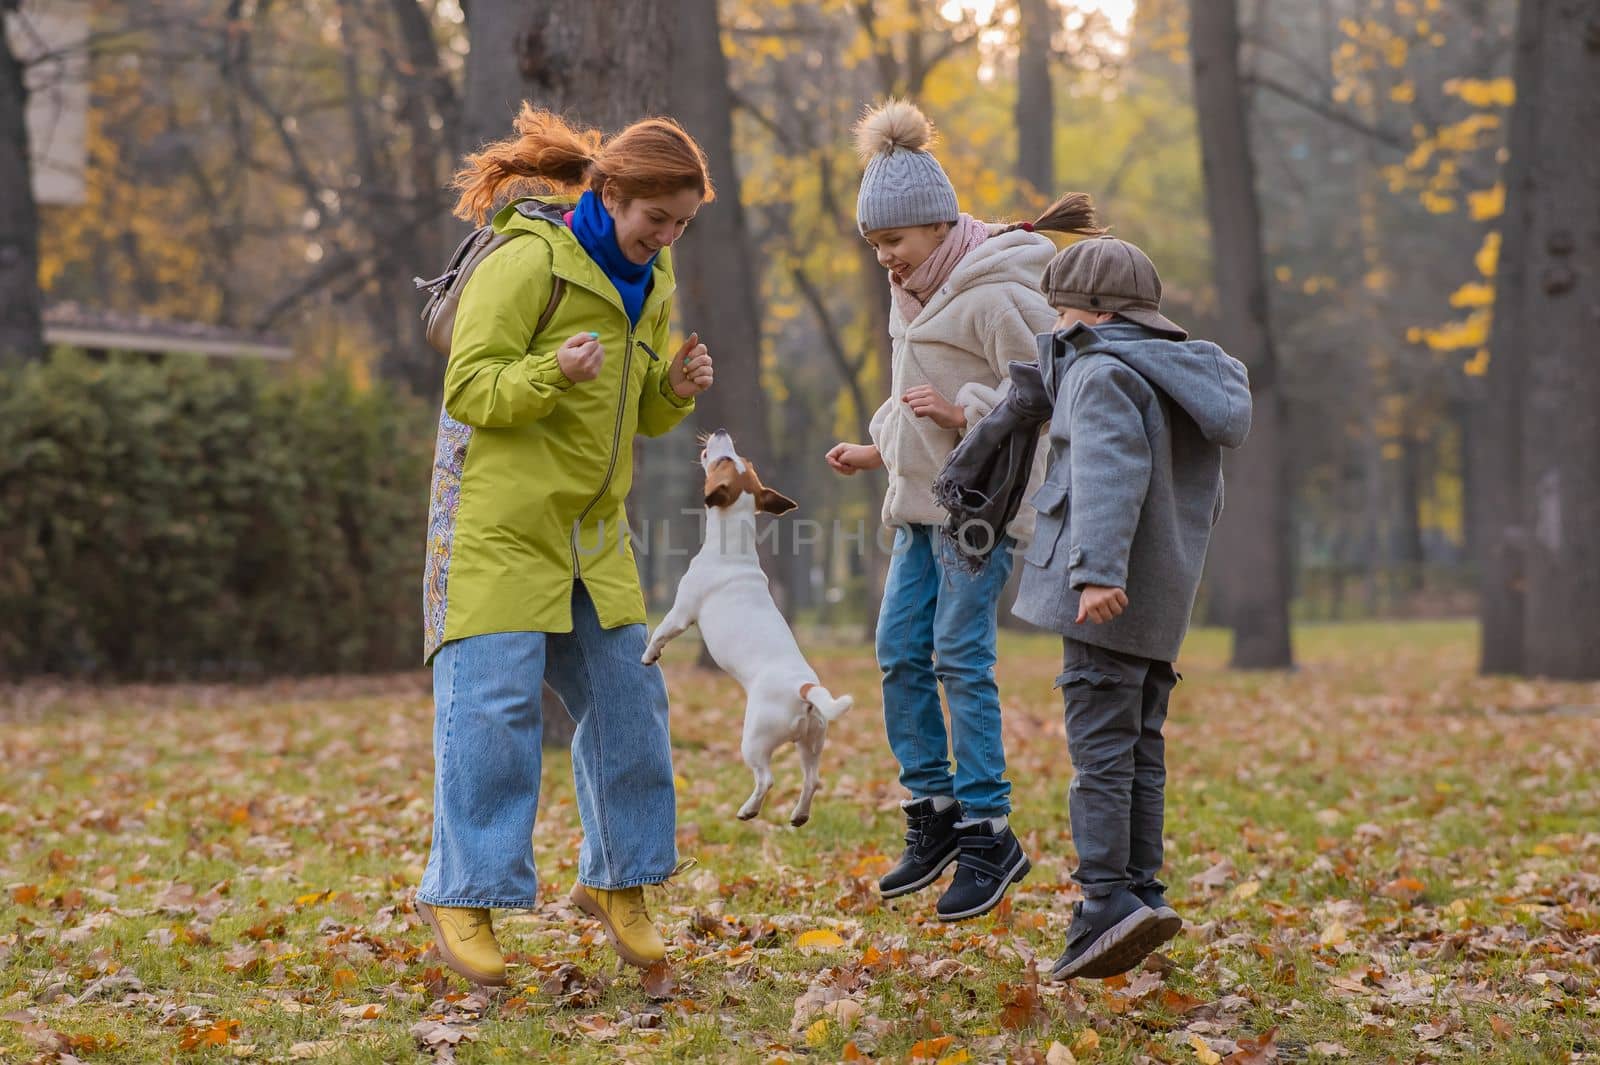 Caucasian children and red-haired woman play with dog jack russell terrier in autumn park. by mrwed54